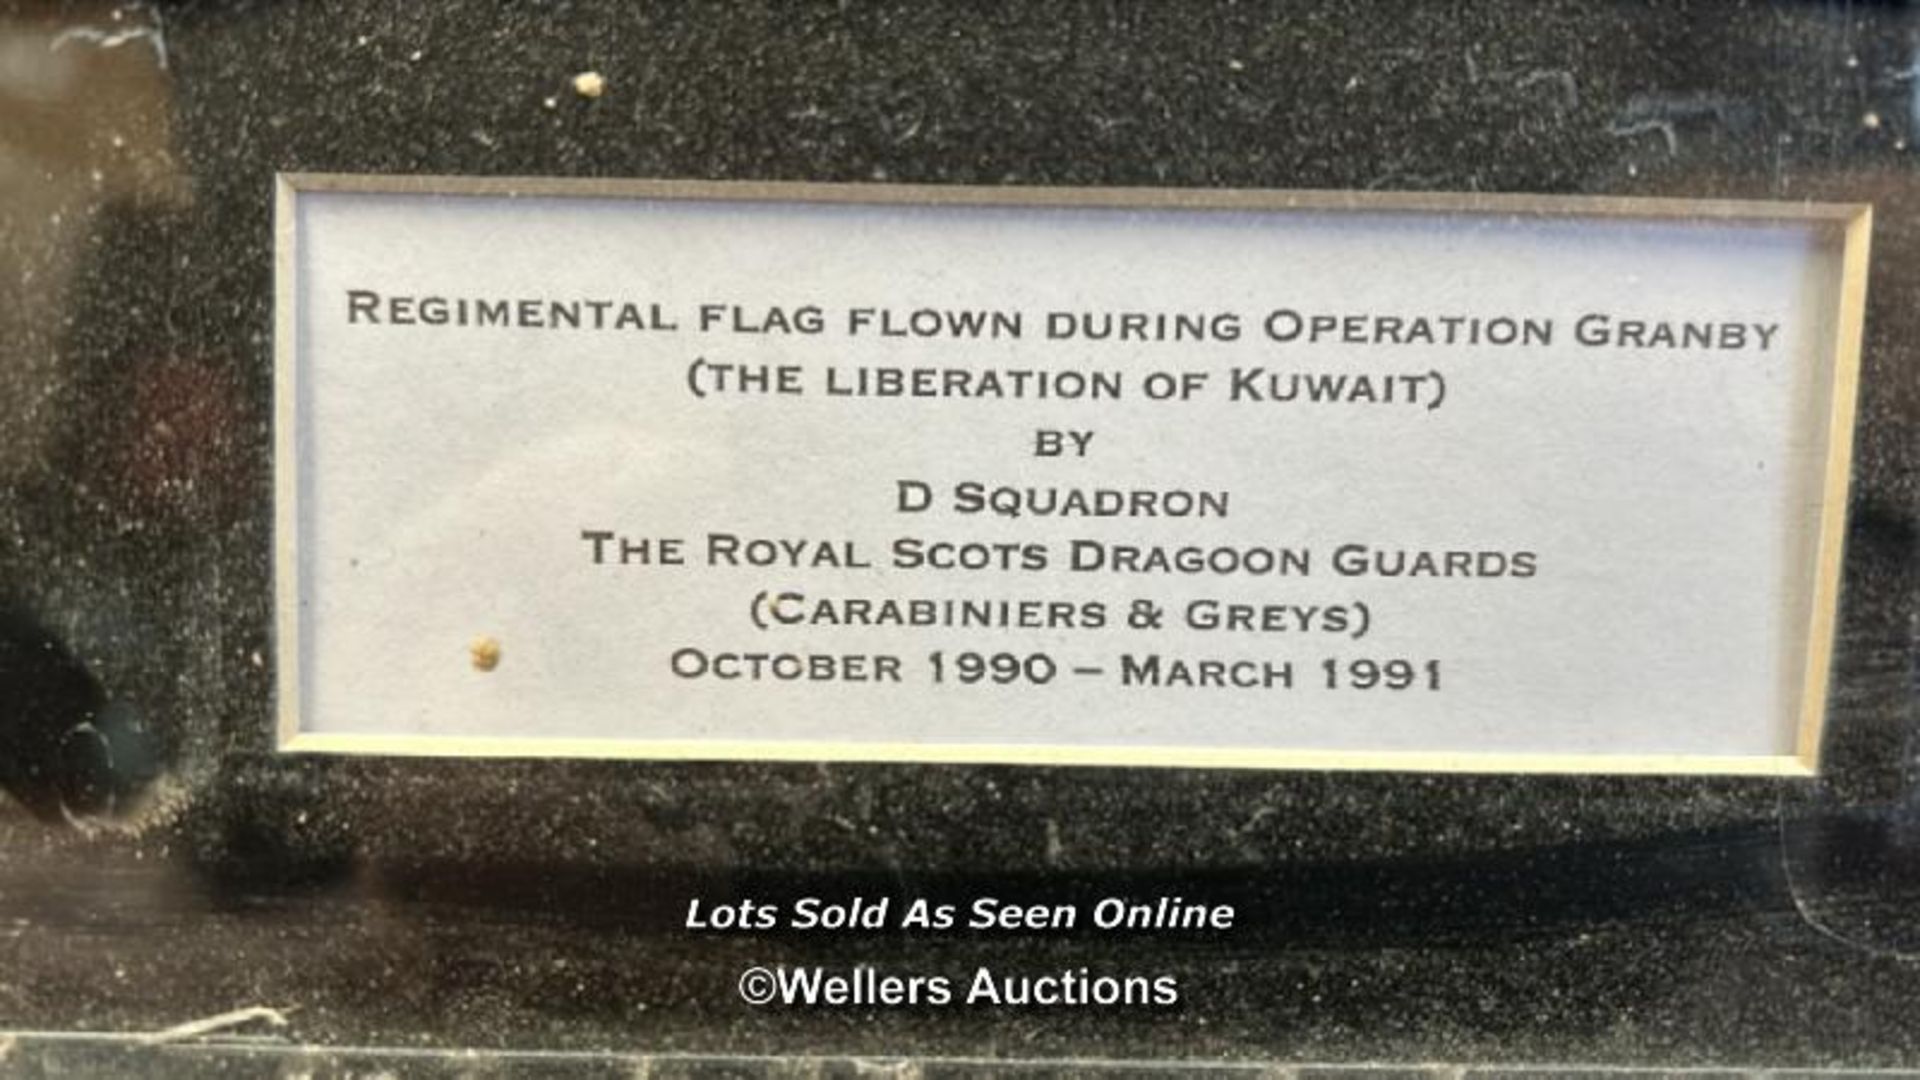 REGIMENTAL FLAG FLOWN DURING OPERATION GRANBY (THE LIBERATION OF KUWAIT) BY D SQUADRON, THE ROYAL - Image 4 of 7